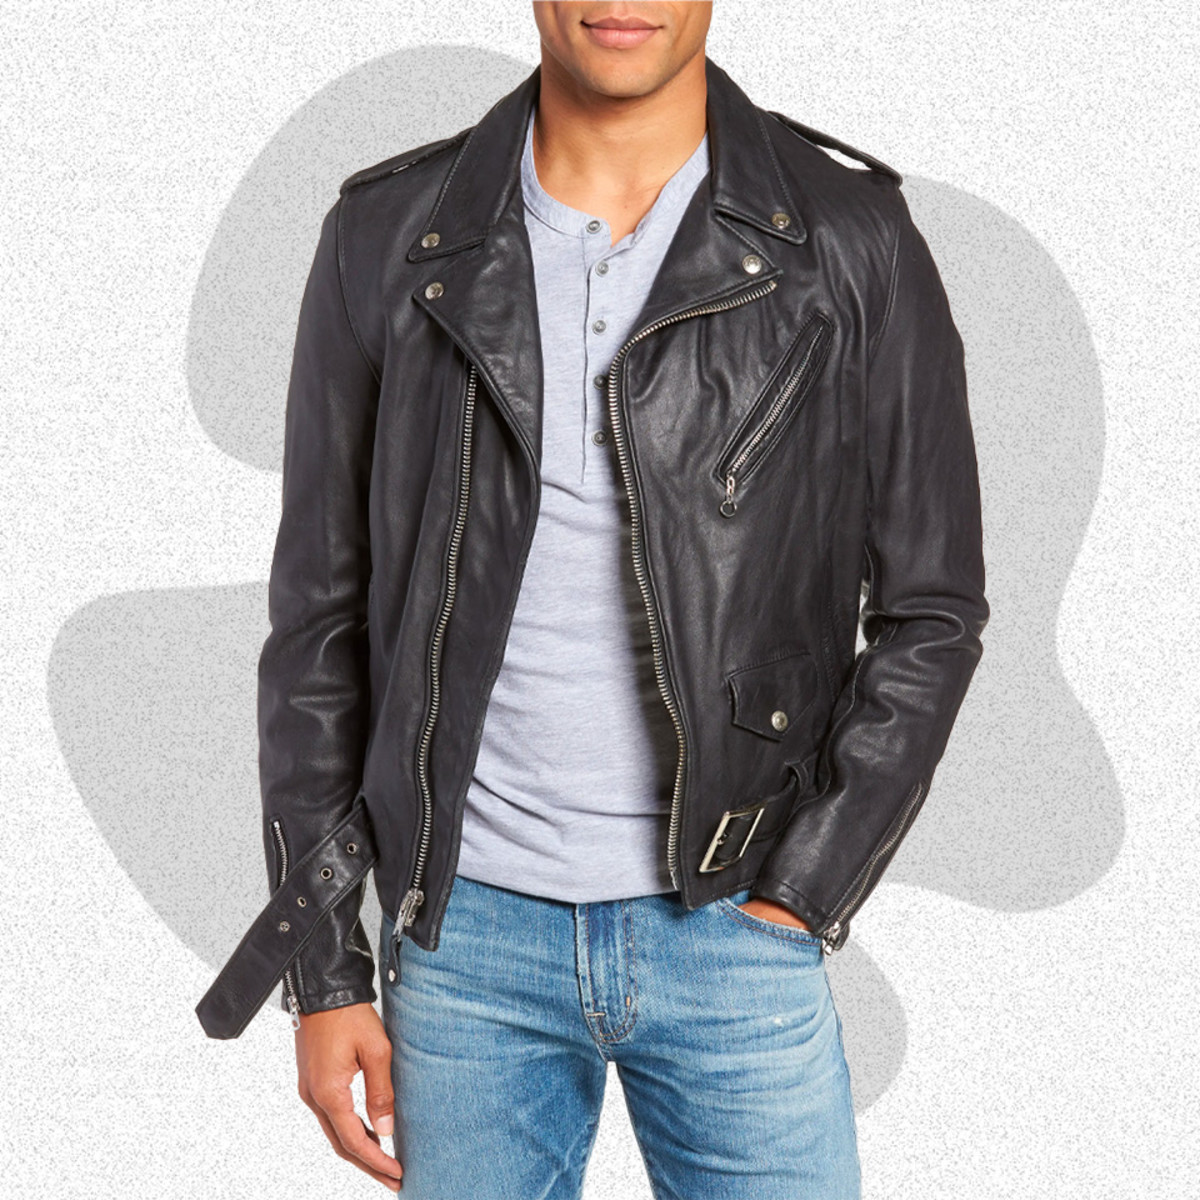 The Best Of Black - 5 Add Ons And Accessories  Leather jacket outfit men, Black  leather jacket men, Black outfit men